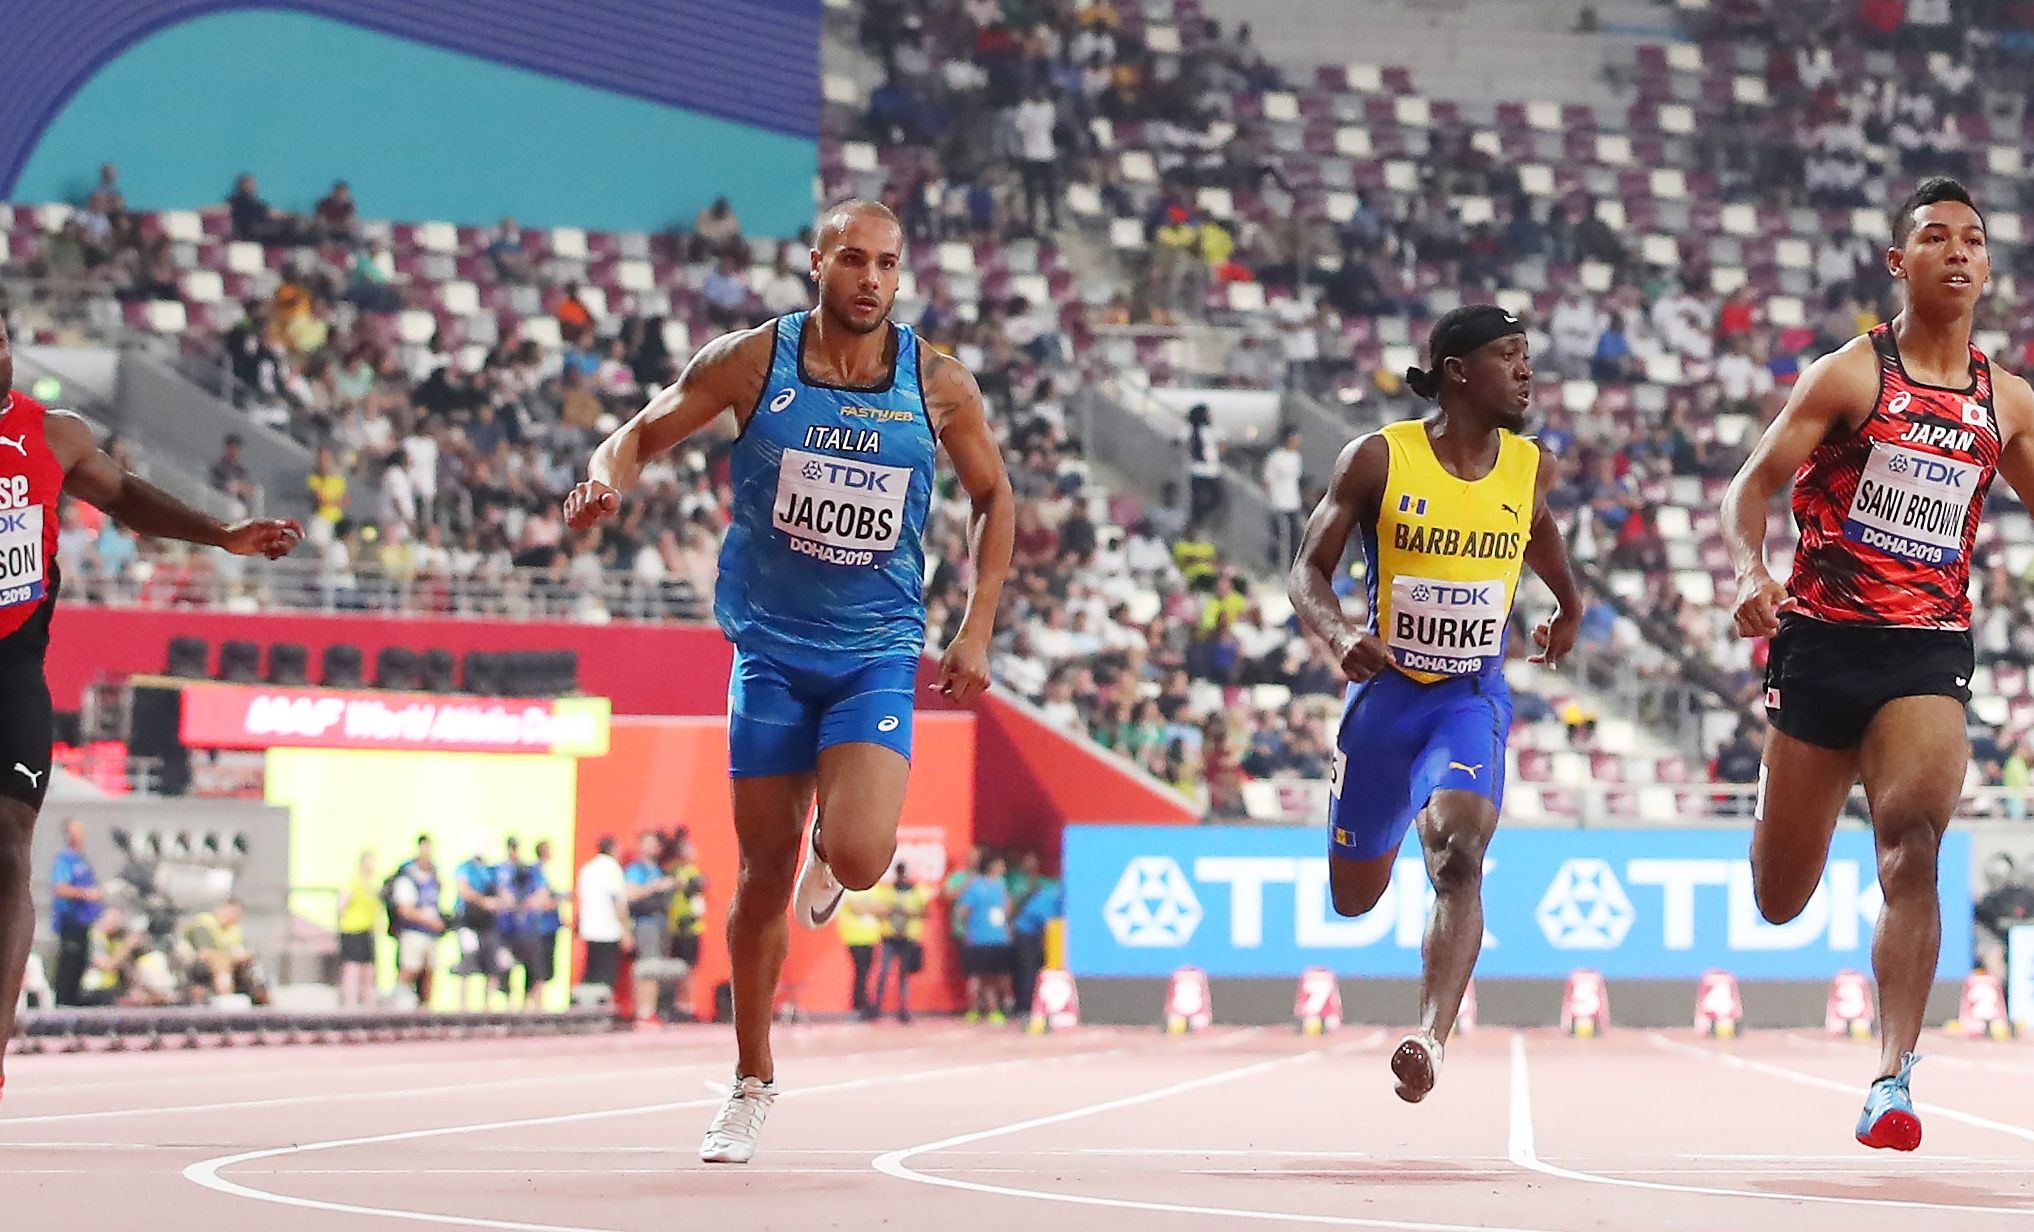 Marcell Jacobs competes at the World Athletics Championships Doha 2019